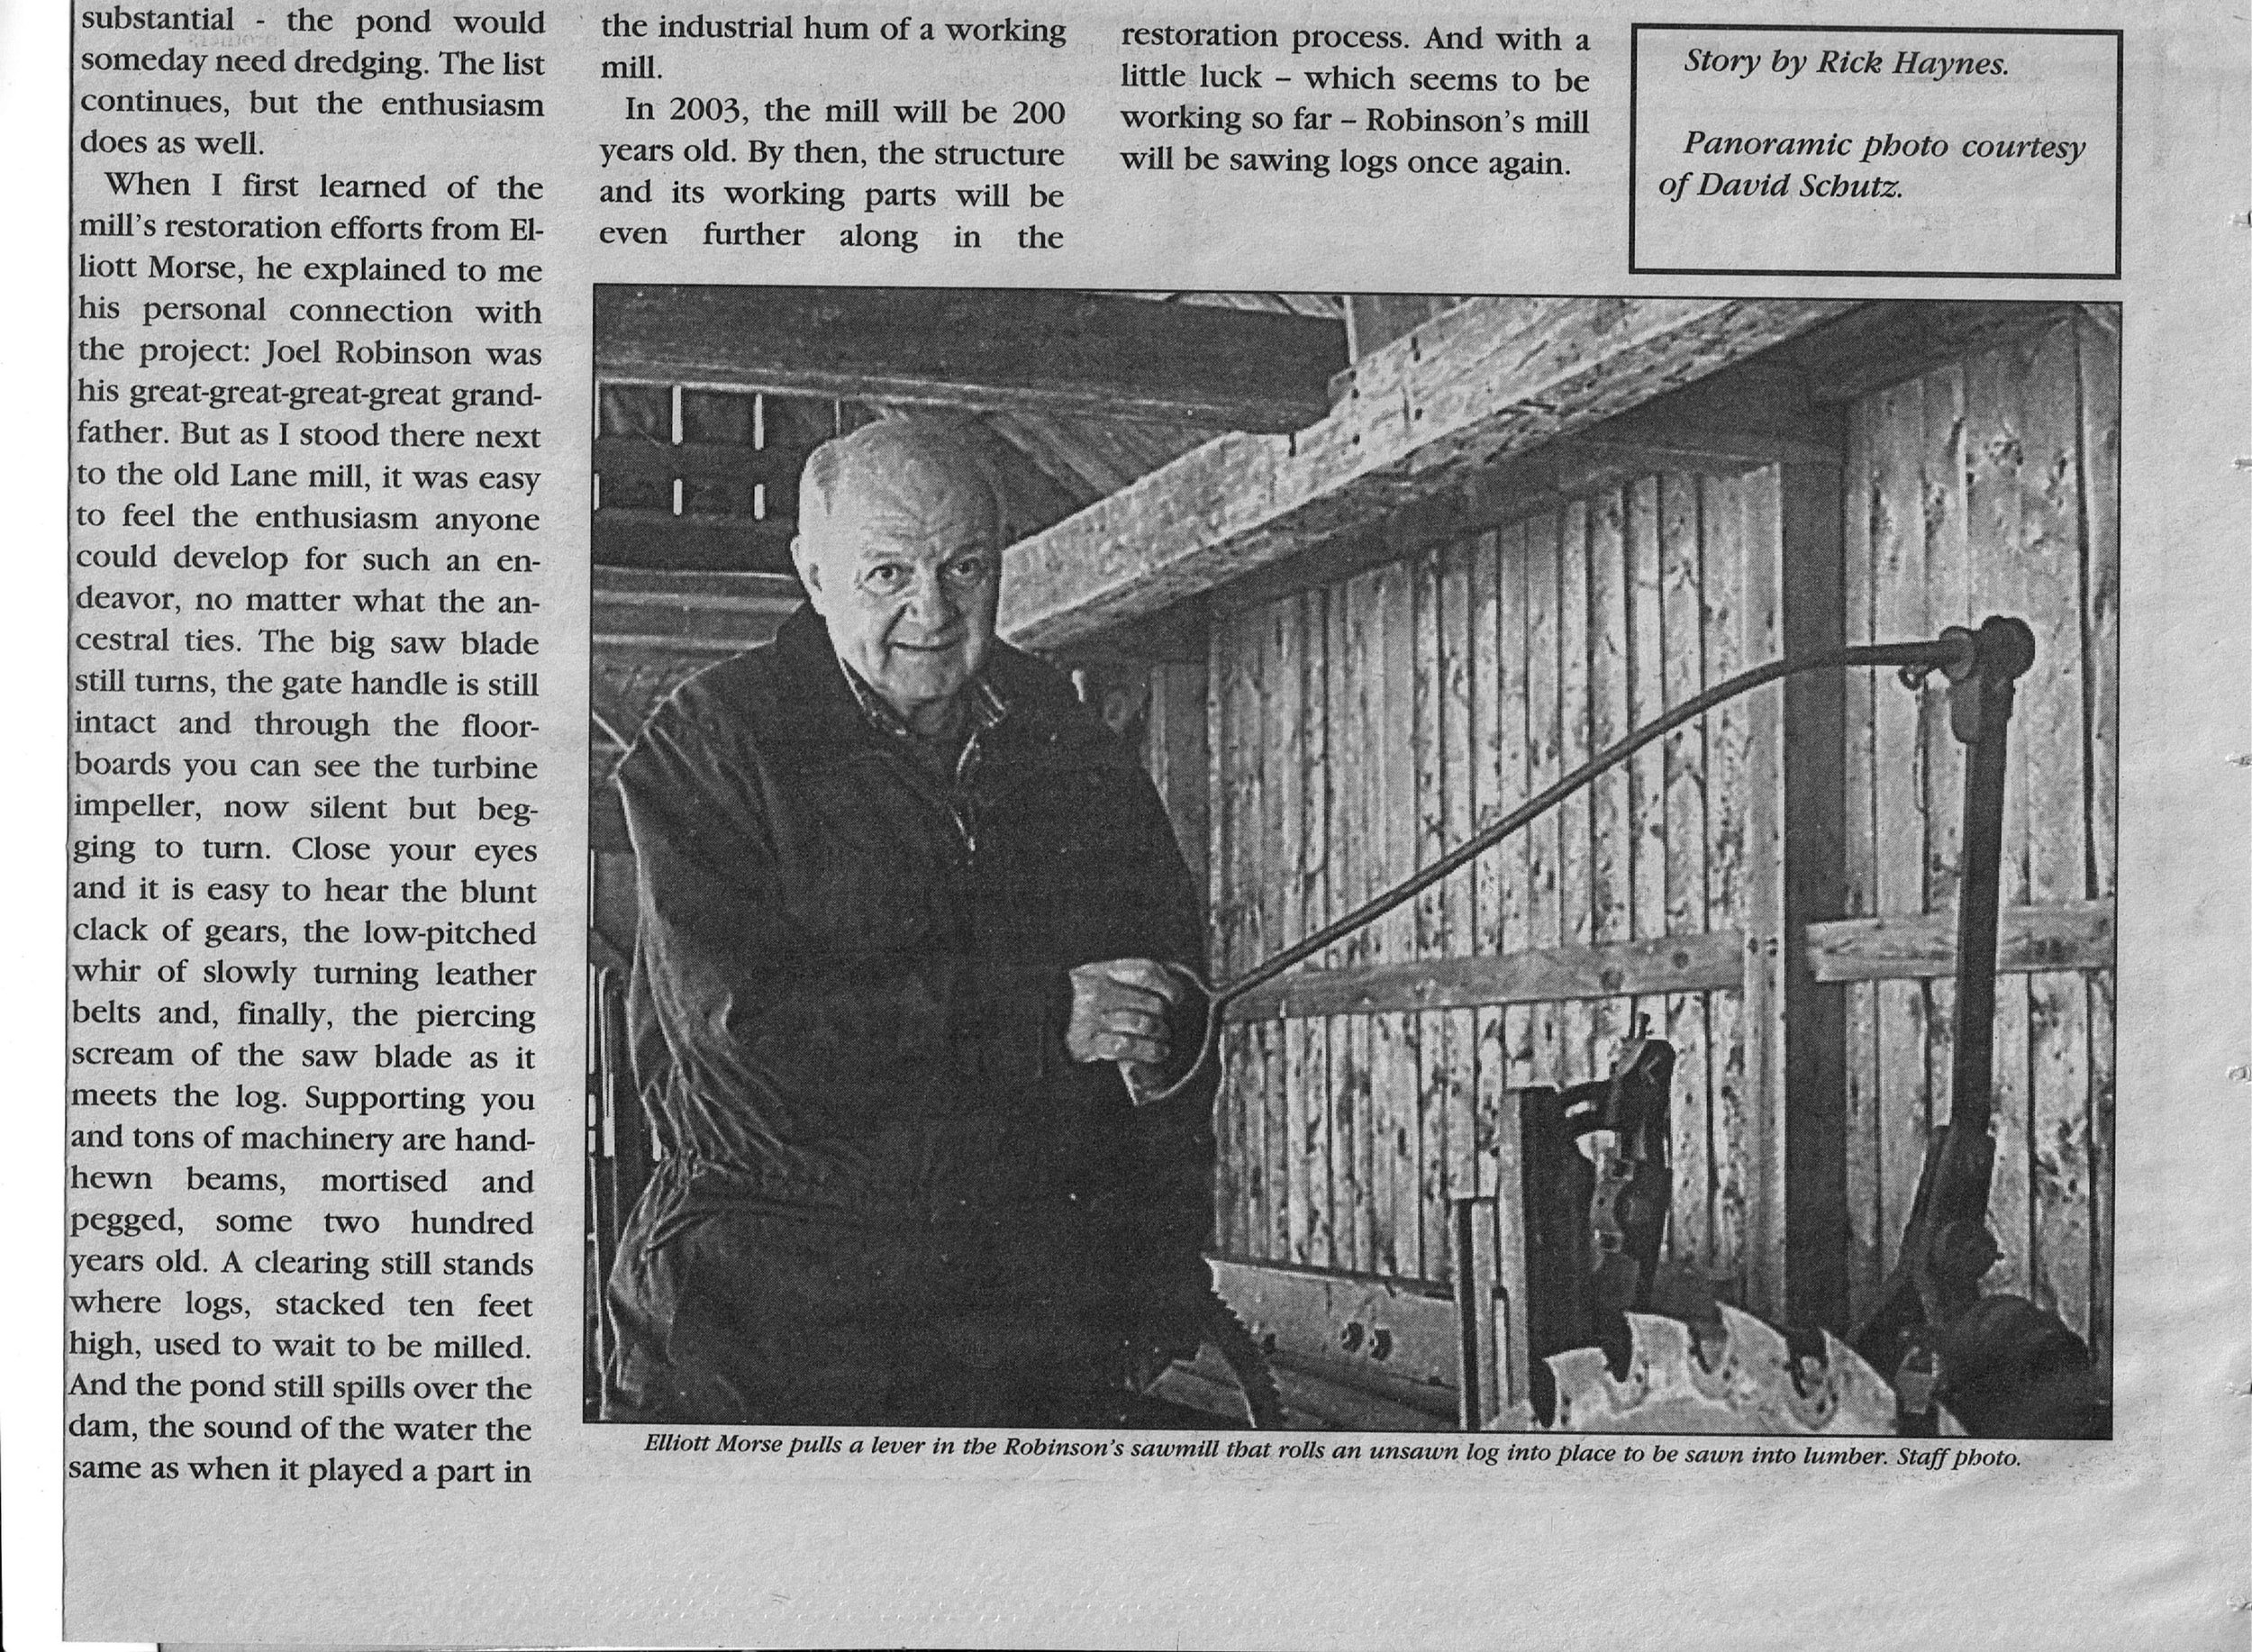 Robinson Sawmill newspaper article excerpt with photo of Elliot Morse in the sawmill..